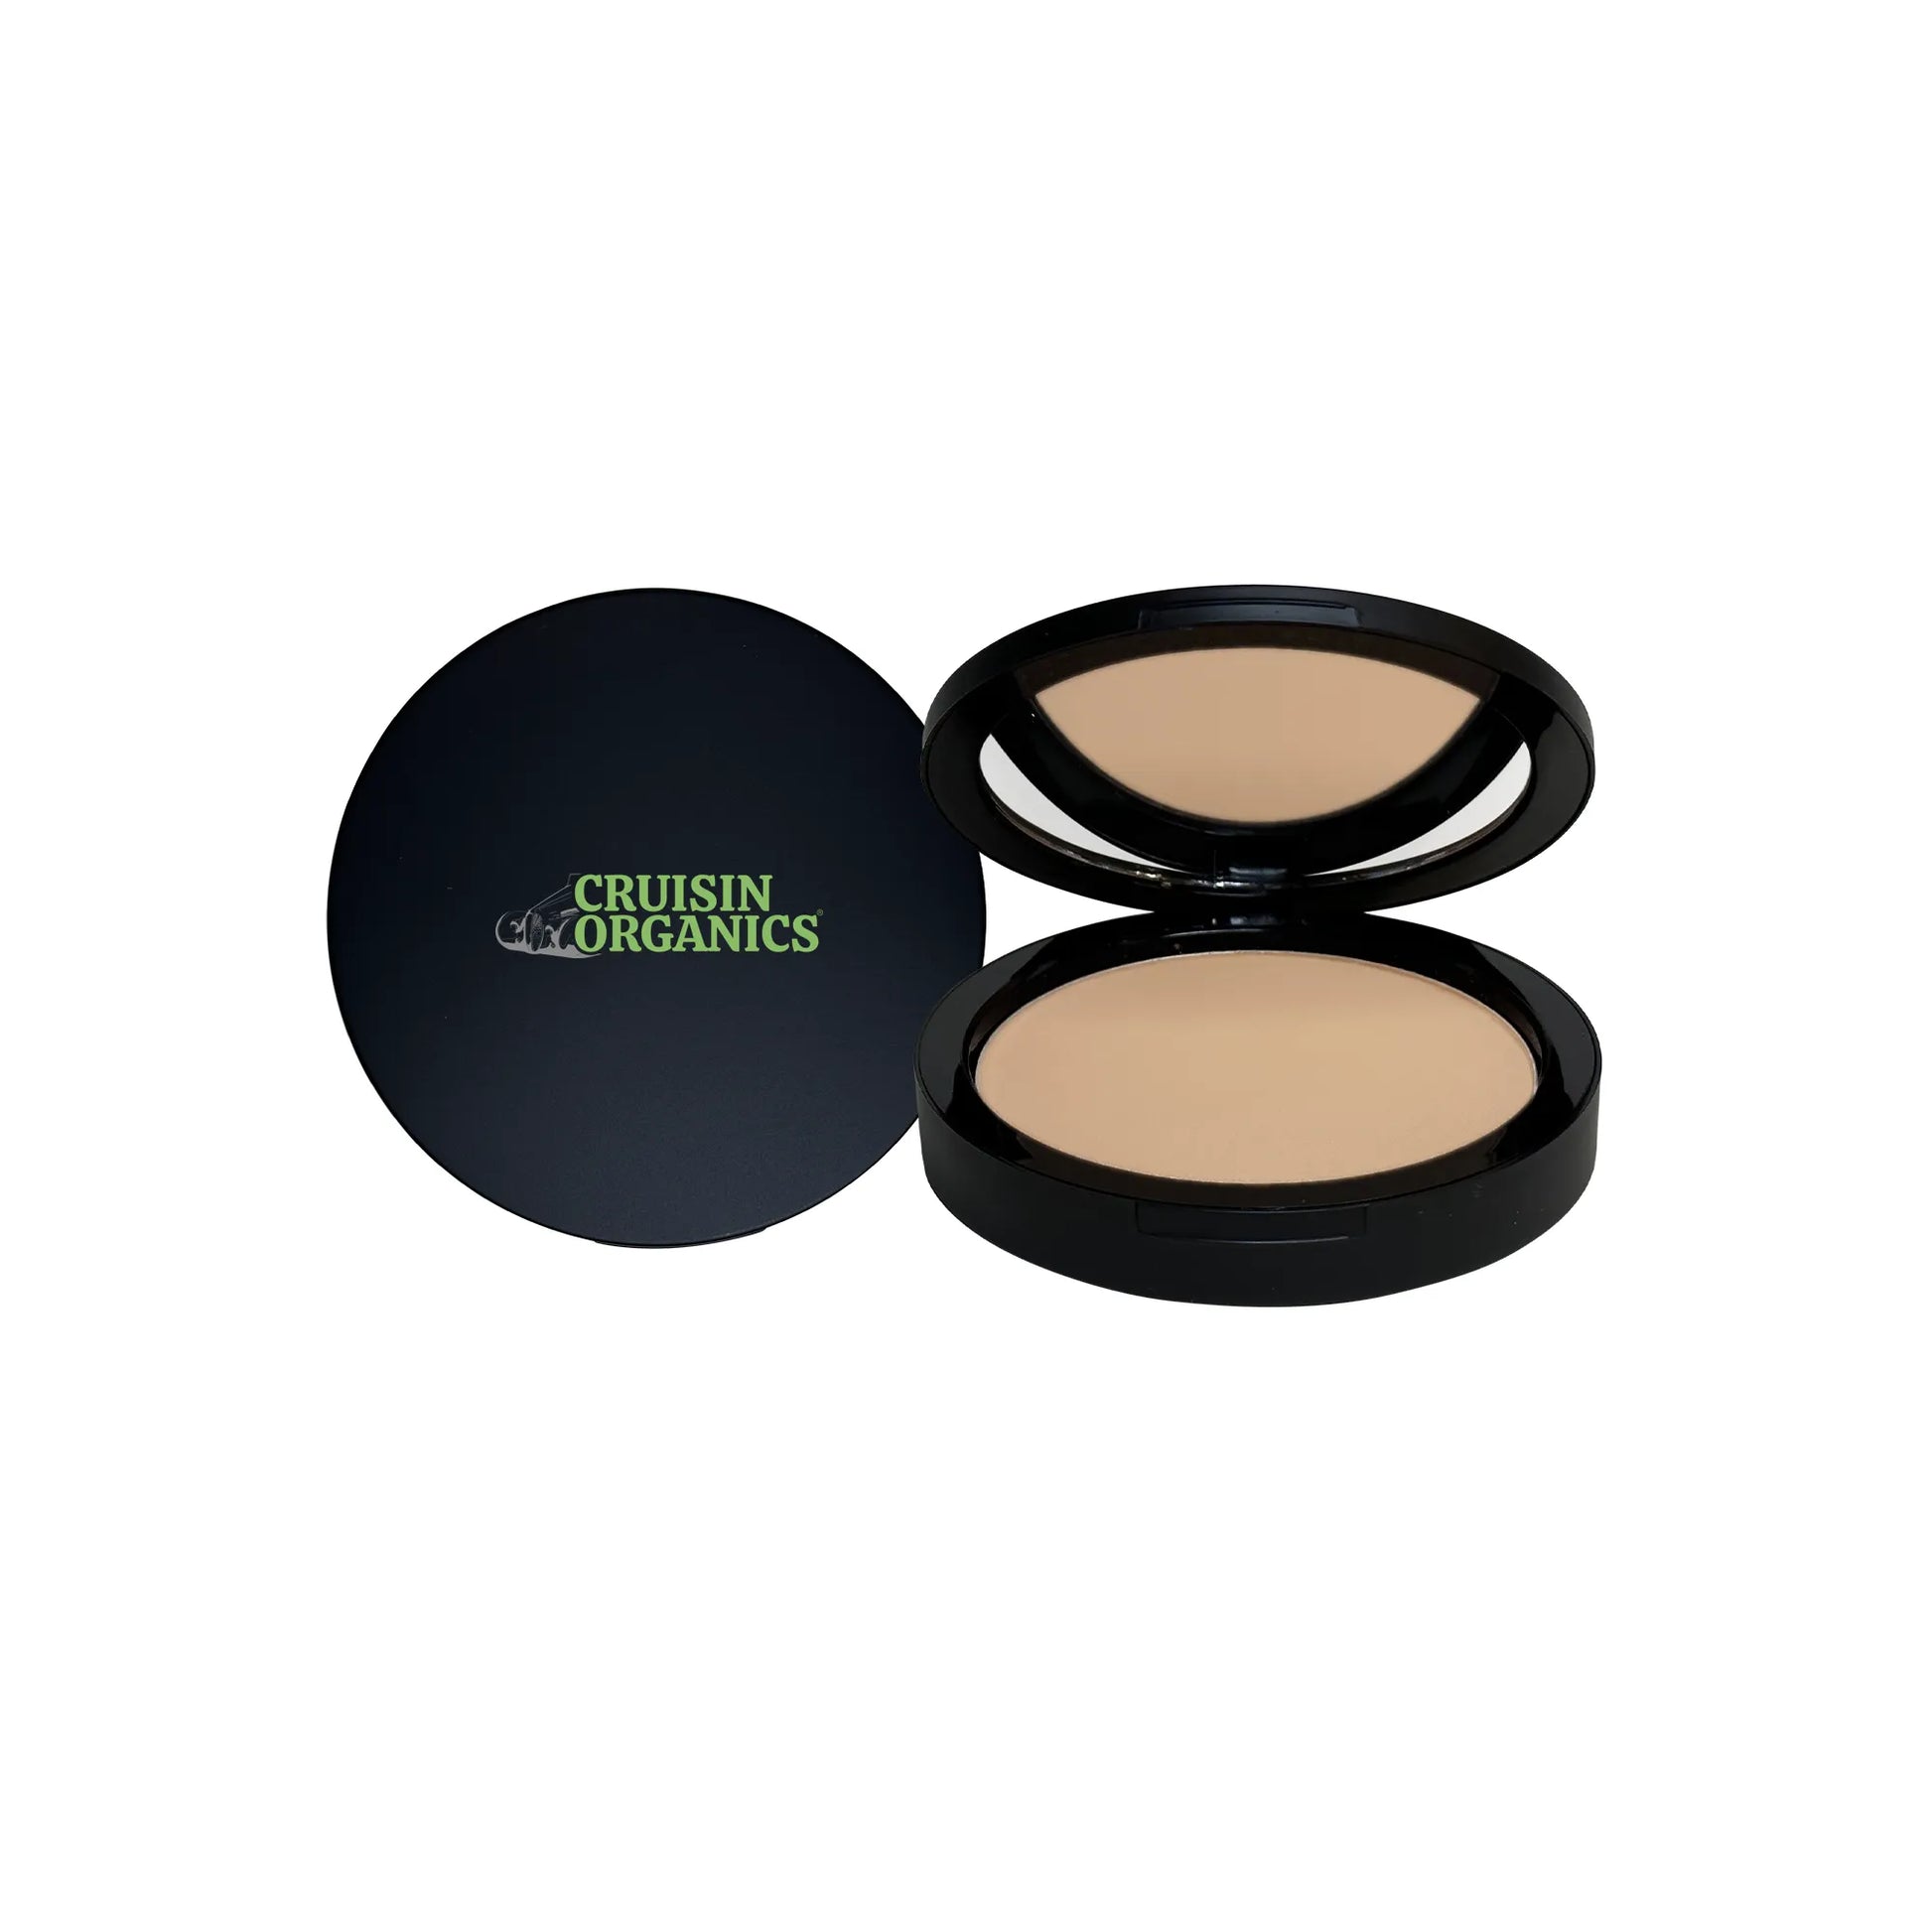 The Cruisin Organics Bisque Powder Foundation is a must-have addition to your makeup collection, combining the benefits of a foundation and sun protection in one convenient product. Achieve a flawless and protected complexion with this versatile powder foundation that ensures your skin stays looking youthful and healthy.